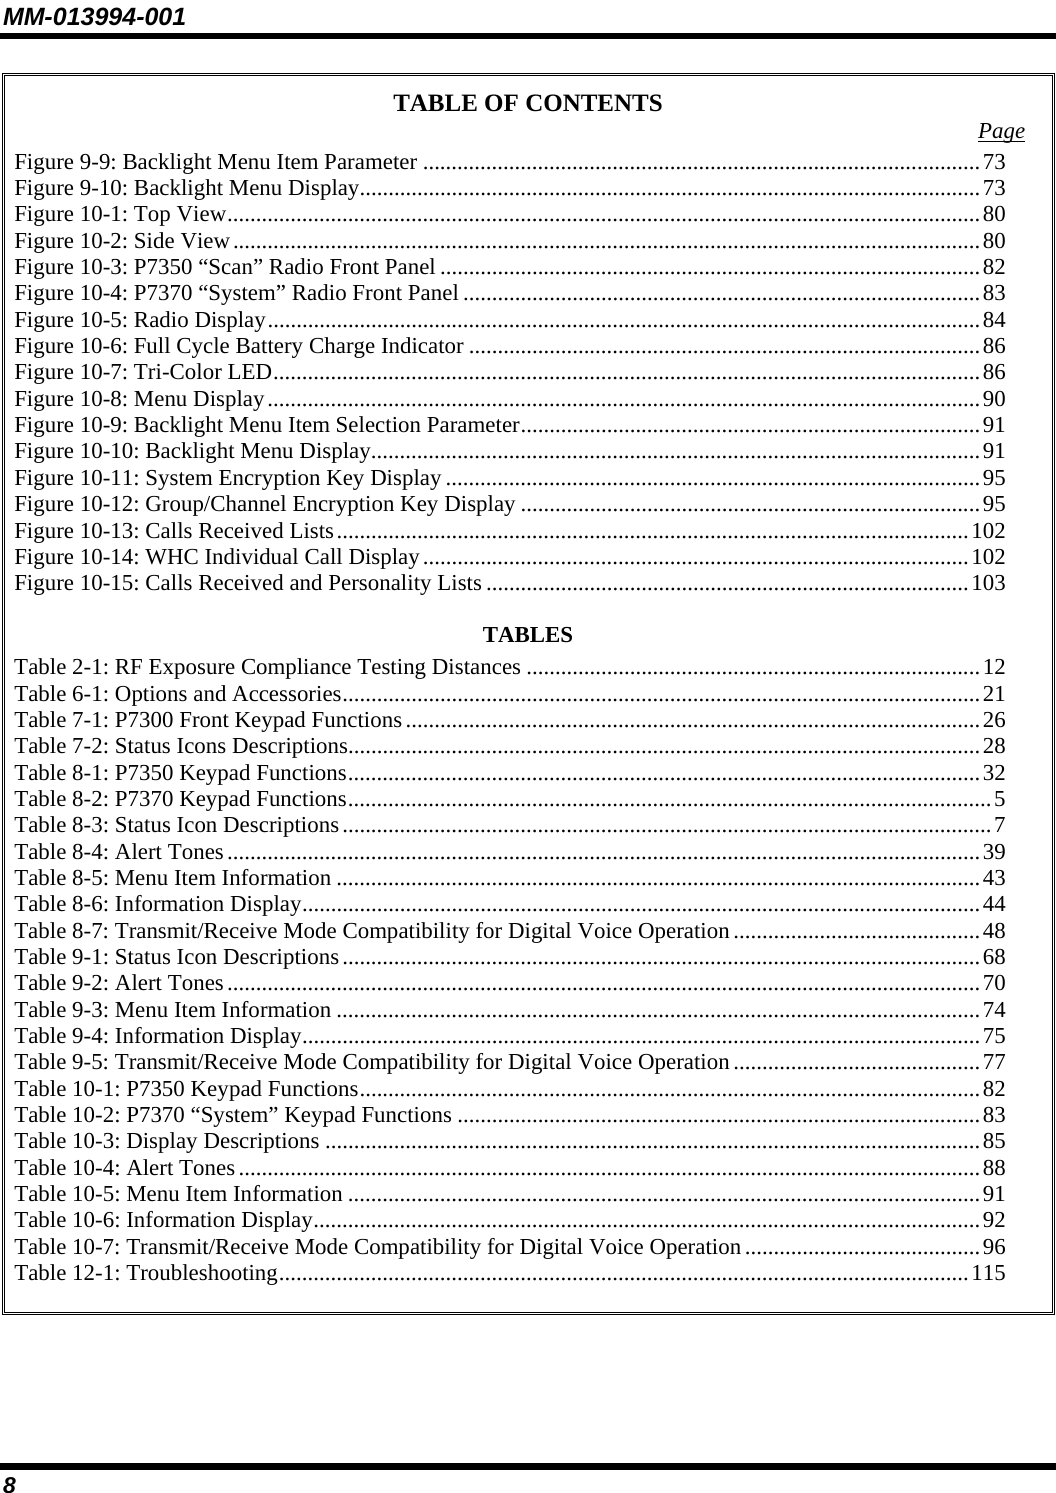 MM-013994-001 8 TABLE OF CONTENTS  Page Figure 9-9: Backlight Menu Item Parameter .................................................................................................73 Figure 9-10: Backlight Menu Display............................................................................................................73 Figure 10-1: Top View...................................................................................................................................80 Figure 10-2: Side View..................................................................................................................................80 Figure 10-3: P7350 “Scan” Radio Front Panel ..............................................................................................82 Figure 10-4: P7370 “System” Radio Front Panel ..........................................................................................83 Figure 10-5: Radio Display............................................................................................................................84 Figure 10-6: Full Cycle Battery Charge Indicator .........................................................................................86 Figure 10-7: Tri-Color LED...........................................................................................................................86 Figure 10-8: Menu Display............................................................................................................................90 Figure 10-9: Backlight Menu Item Selection Parameter................................................................................91 Figure 10-10: Backlight Menu Display..........................................................................................................91 Figure 10-11: System Encryption Key Display .............................................................................................95 Figure 10-12: Group/Channel Encryption Key Display ................................................................................95 Figure 10-13: Calls Received Lists..............................................................................................................102 Figure 10-14: WHC Individual Call Display...............................................................................................102 Figure 10-15: Calls Received and Personality Lists ....................................................................................103 TABLES Table 2-1: RF Exposure Compliance Testing Distances ...............................................................................12 Table 6-1: Options and Accessories...............................................................................................................21 Table 7-1: P7300 Front Keypad Functions....................................................................................................26 Table 7-2: Status Icons Descriptions..............................................................................................................28 Table 8-1: P7350 Keypad Functions..............................................................................................................32 Table 8-2: P7370 Keypad Functions................................................................................................................5 Table 8-3: Status Icon Descriptions.................................................................................................................7 Table 8-4: Alert Tones...................................................................................................................................39 Table 8-5: Menu Item Information ................................................................................................................43 Table 8-6: Information Display......................................................................................................................44 Table 8-7: Transmit/Receive Mode Compatibility for Digital Voice Operation...........................................48 Table 9-1: Status Icon Descriptions...............................................................................................................68 Table 9-2: Alert Tones...................................................................................................................................70 Table 9-3: Menu Item Information ................................................................................................................74 Table 9-4: Information Display......................................................................................................................75 Table 9-5: Transmit/Receive Mode Compatibility for Digital Voice Operation...........................................77 Table 10-1: P7350 Keypad Functions............................................................................................................82 Table 10-2: P7370 “System” Keypad Functions ...........................................................................................83 Table 10-3: Display Descriptions ..................................................................................................................85 Table 10-4: Alert Tones.................................................................................................................................88 Table 10-5: Menu Item Information ..............................................................................................................91 Table 10-6: Information Display....................................................................................................................92 Table 10-7: Transmit/Receive Mode Compatibility for Digital Voice Operation.........................................96 Table 12-1: Troubleshooting........................................................................................................................115   